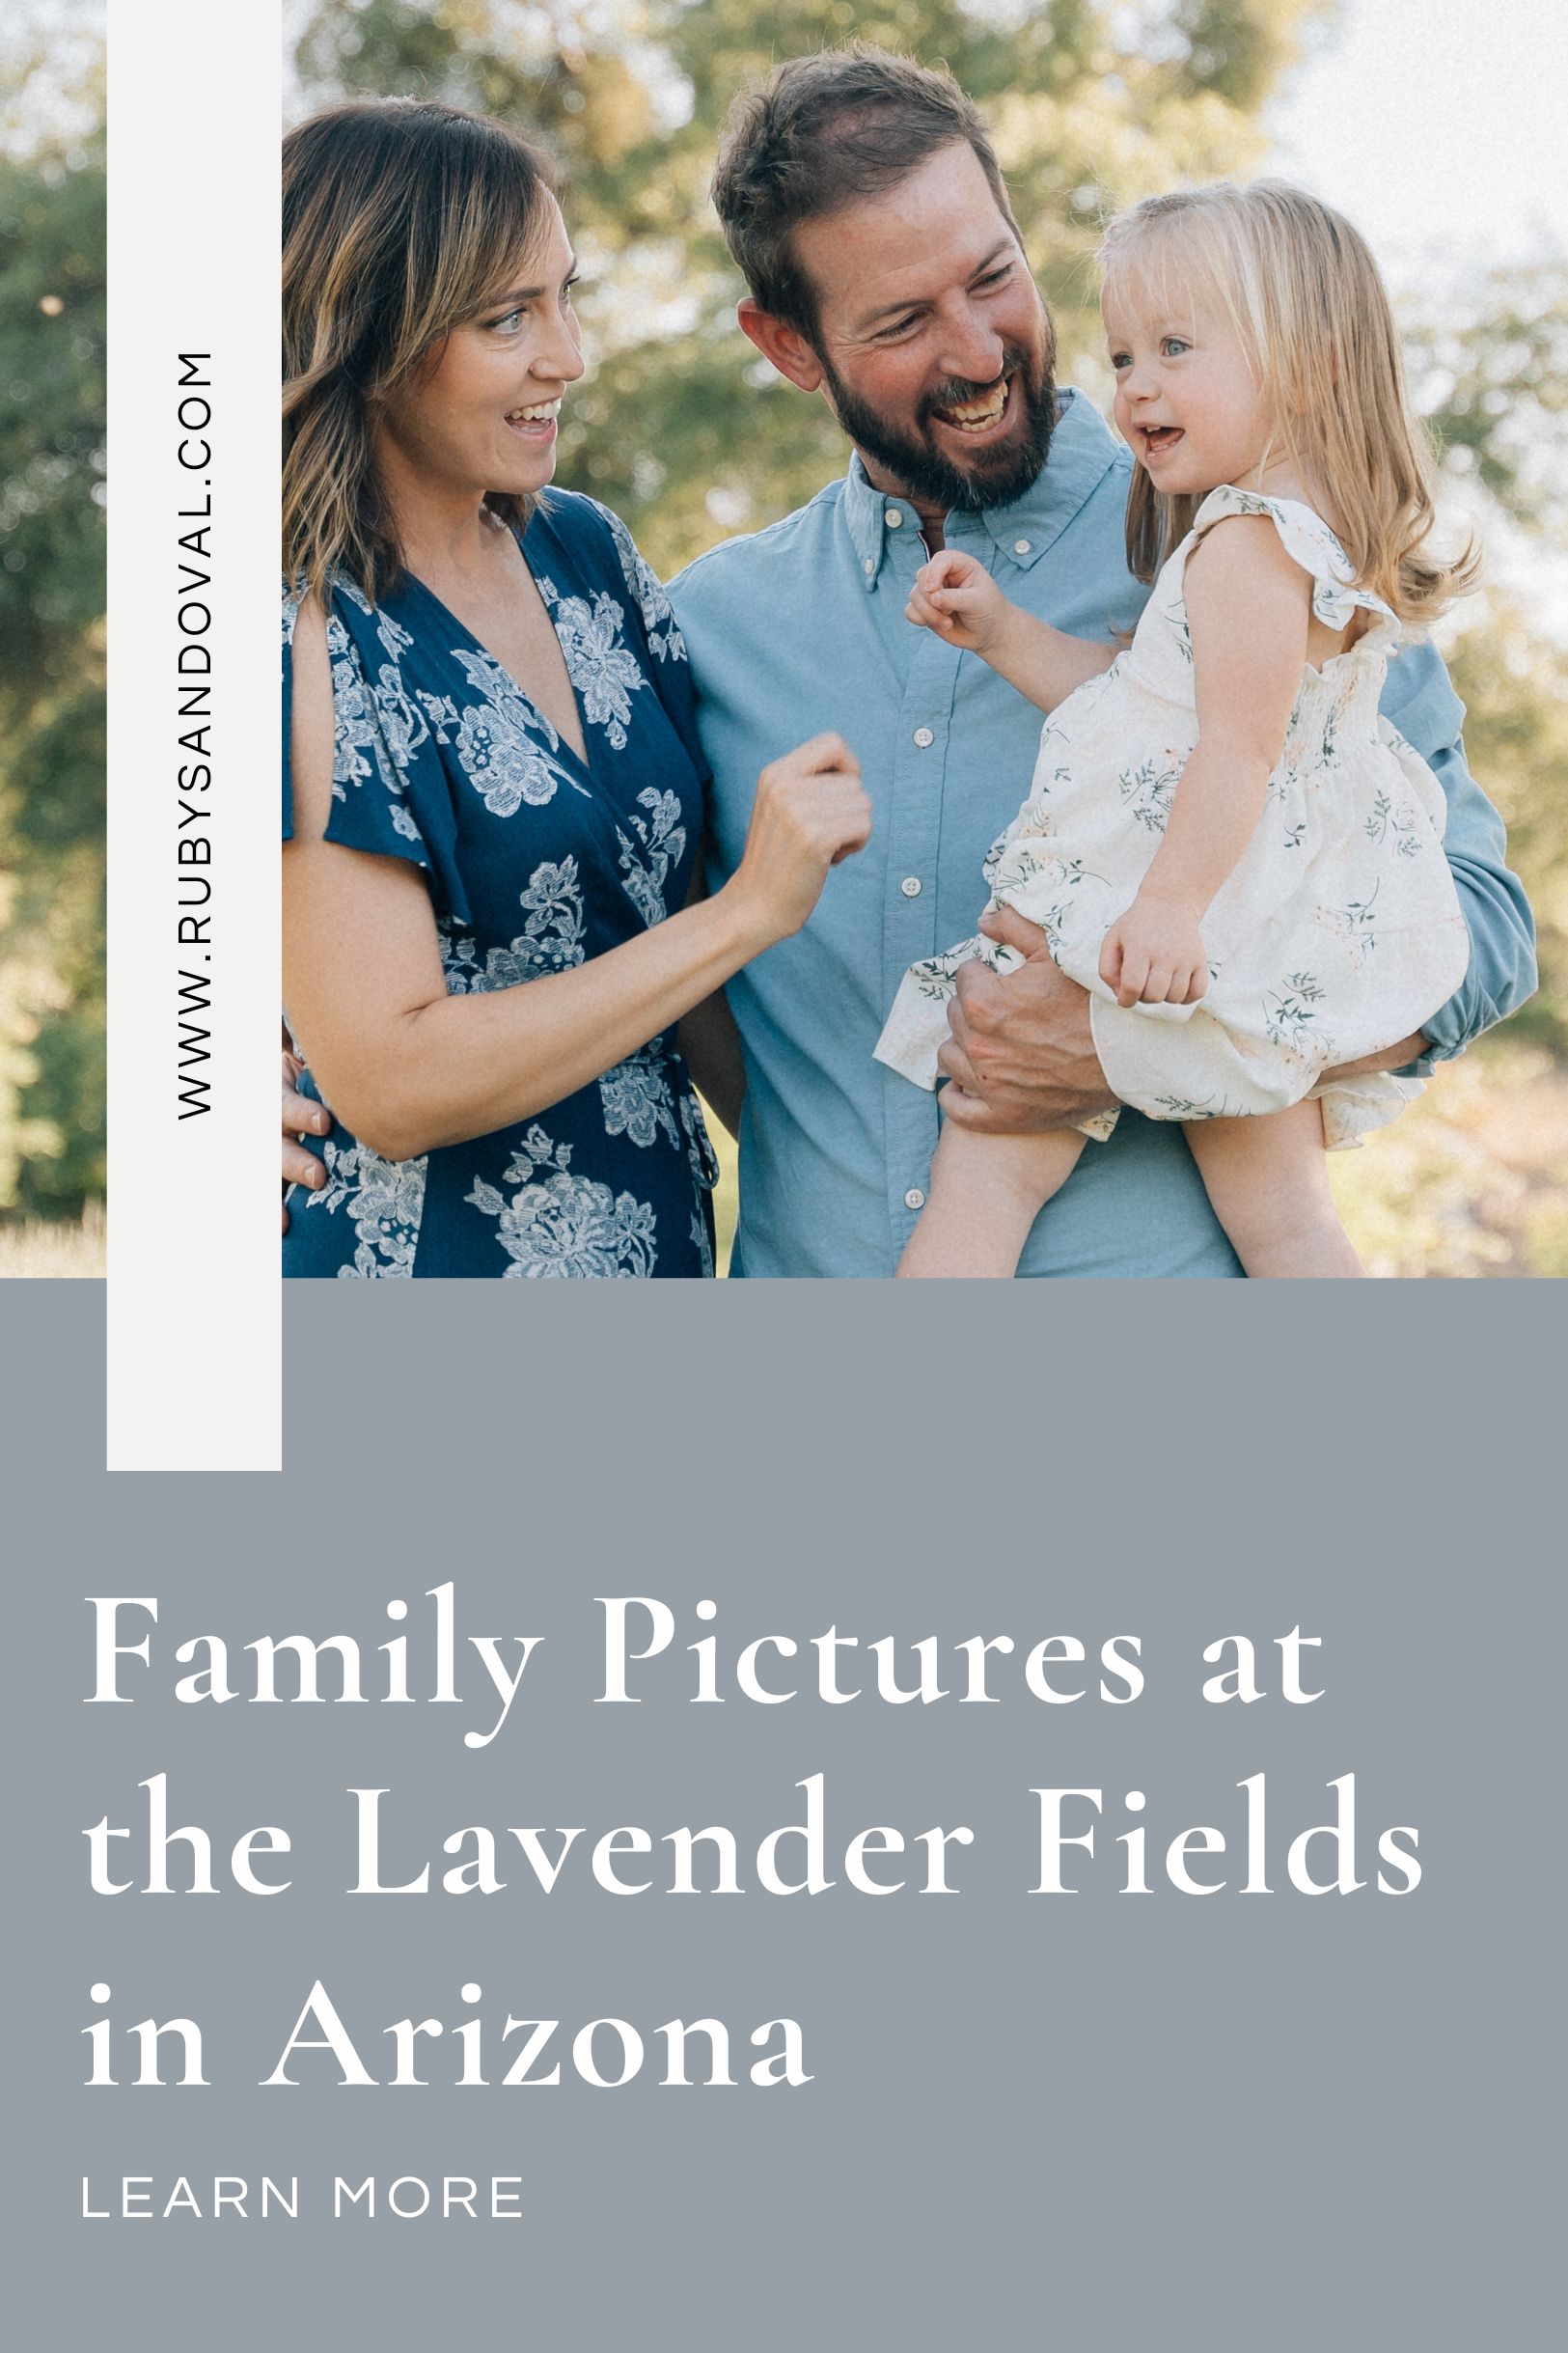 Pin for family pictures in the lavender fields.